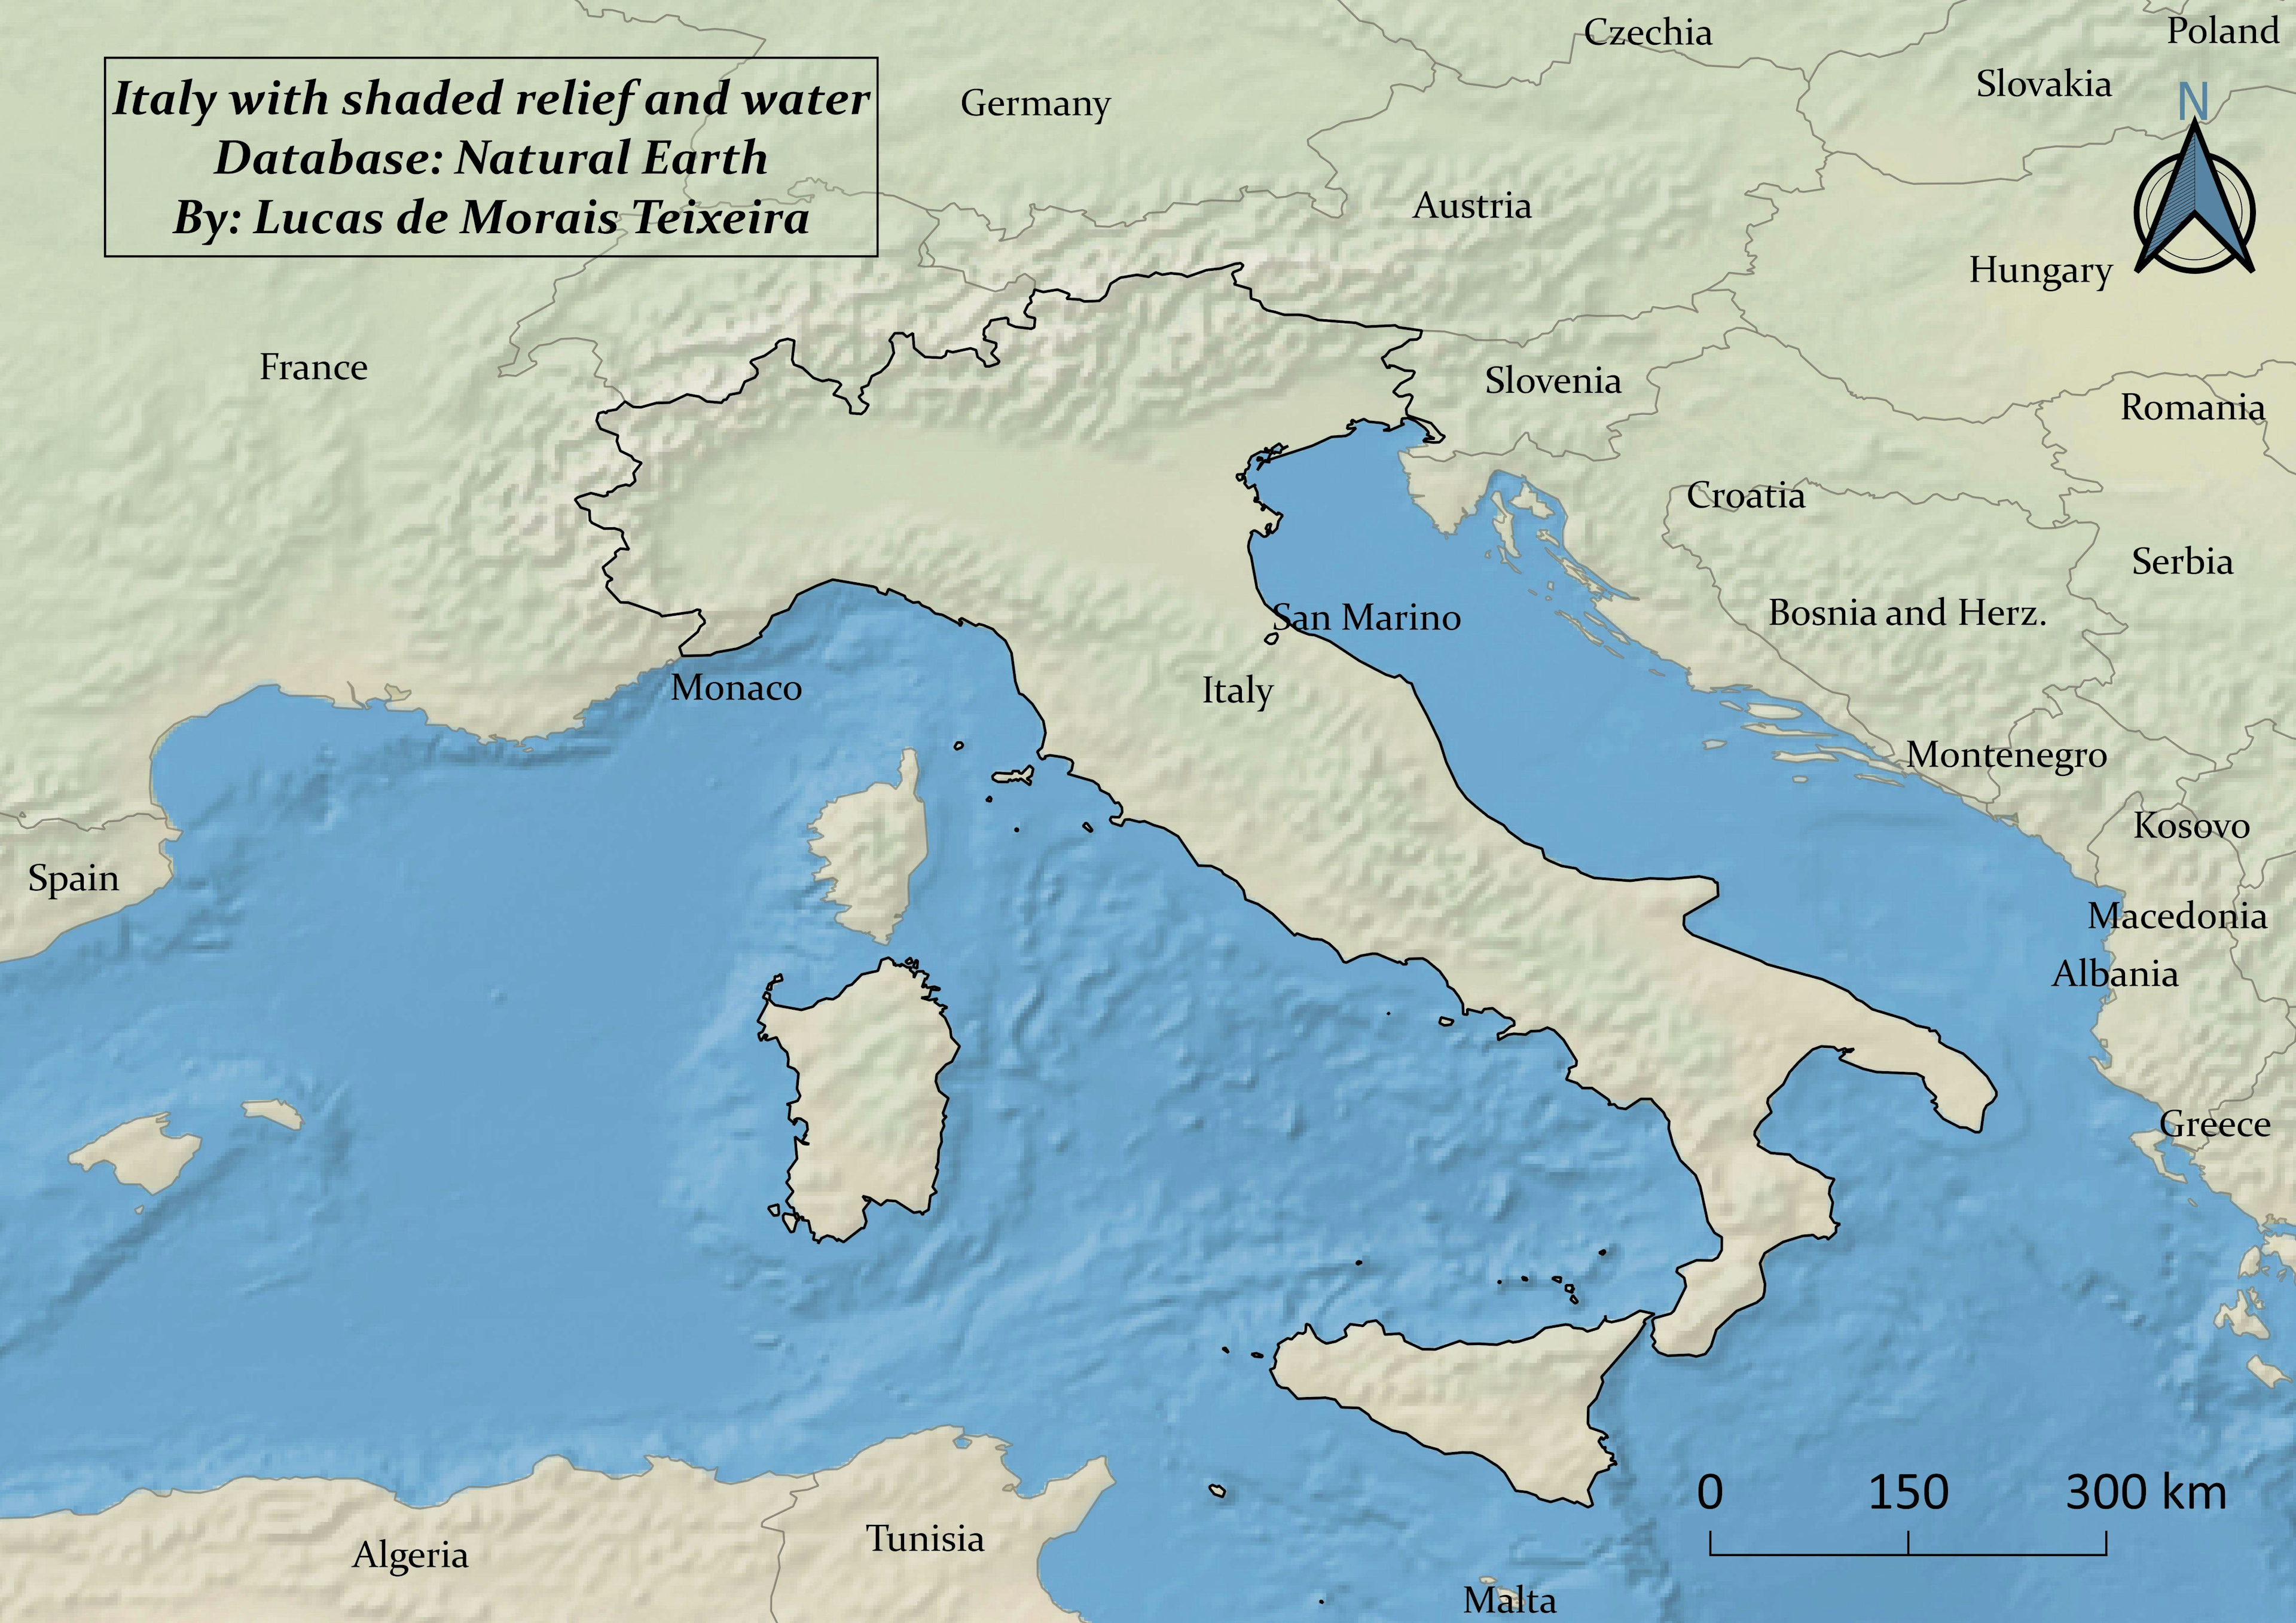 Italy with shaded relief and water